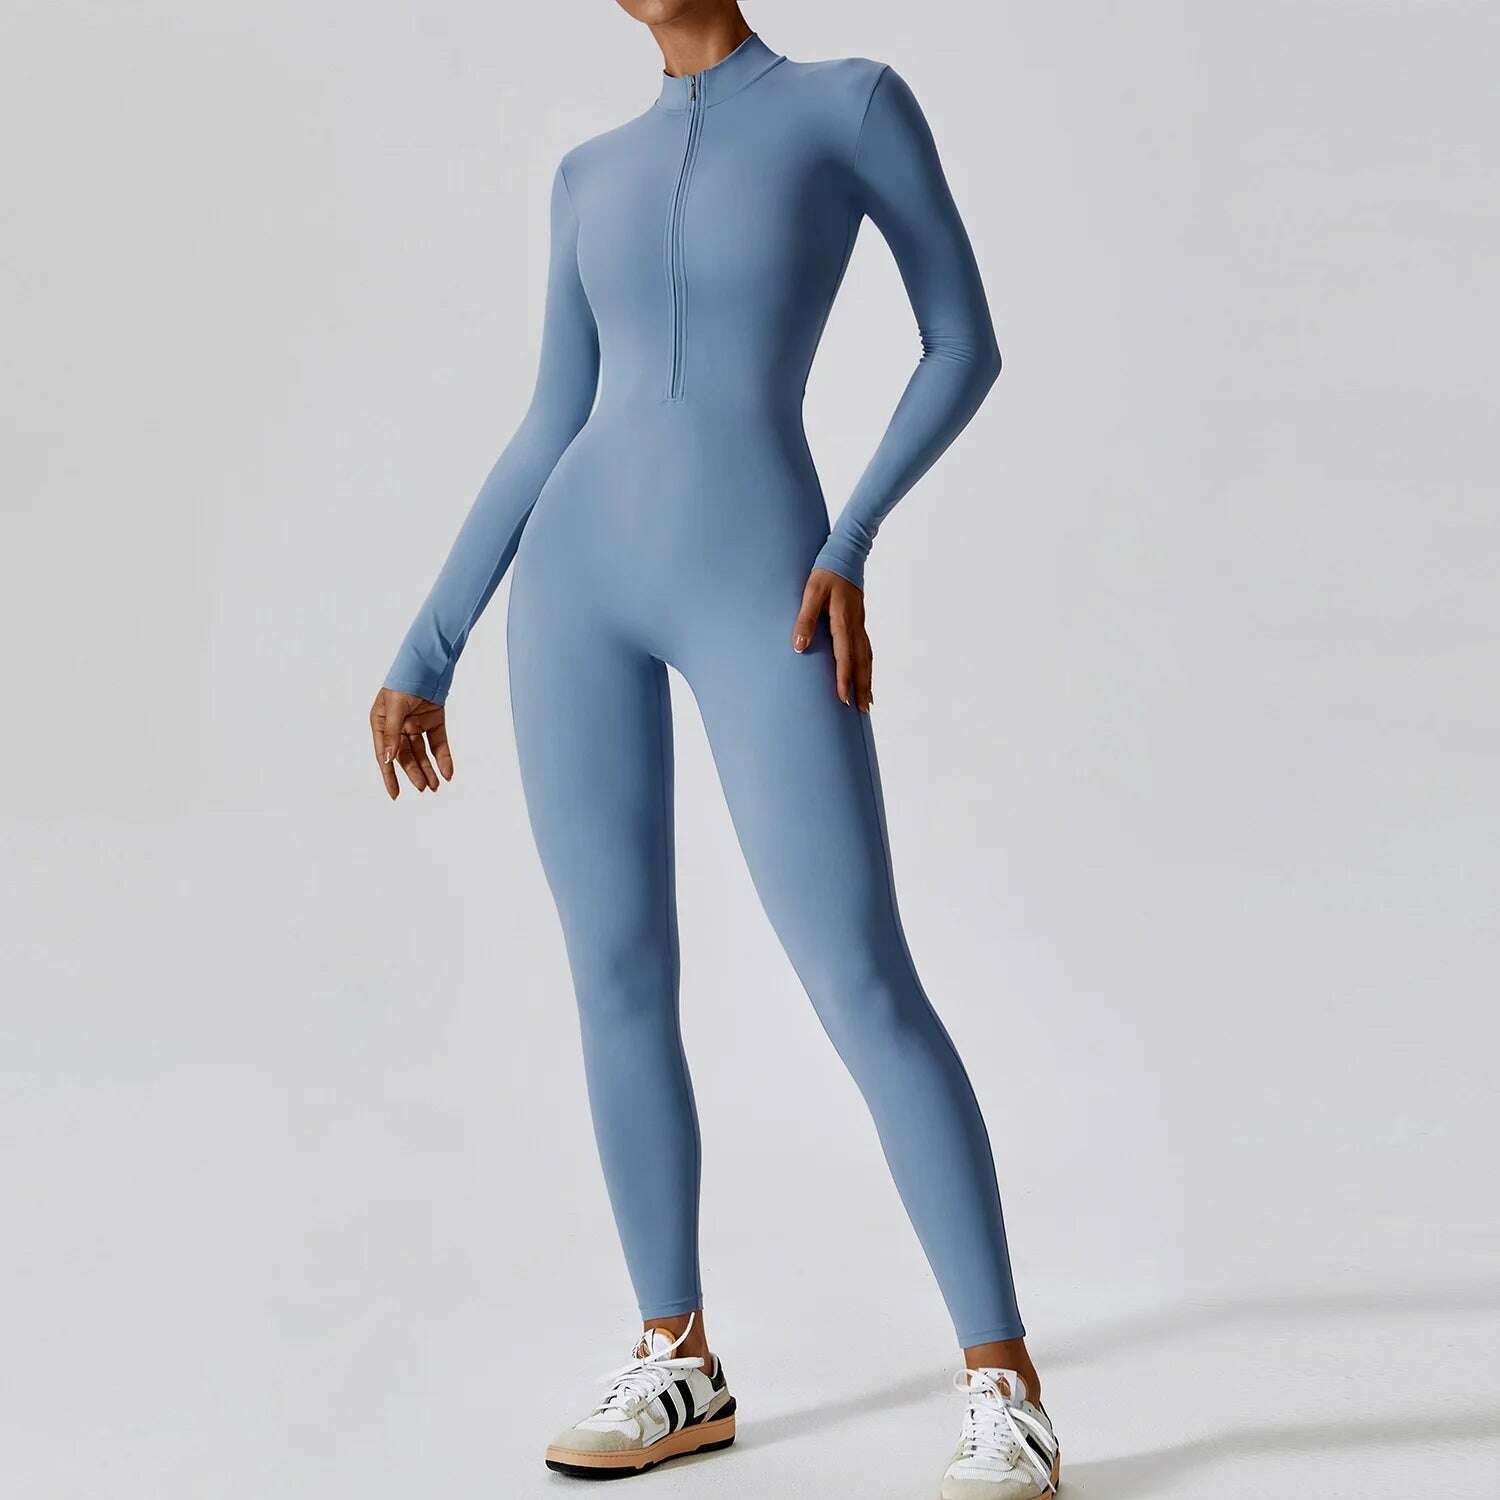 KIMLUD, Yoga Boilersuit Long Sleeved Women's Sportswear Gym Zipper Jumpsuits Workout High-intensity Fitness One-piece Skin-tight Garment, Haze Blue / S / CHINA, KIMLUD Womens Clothes